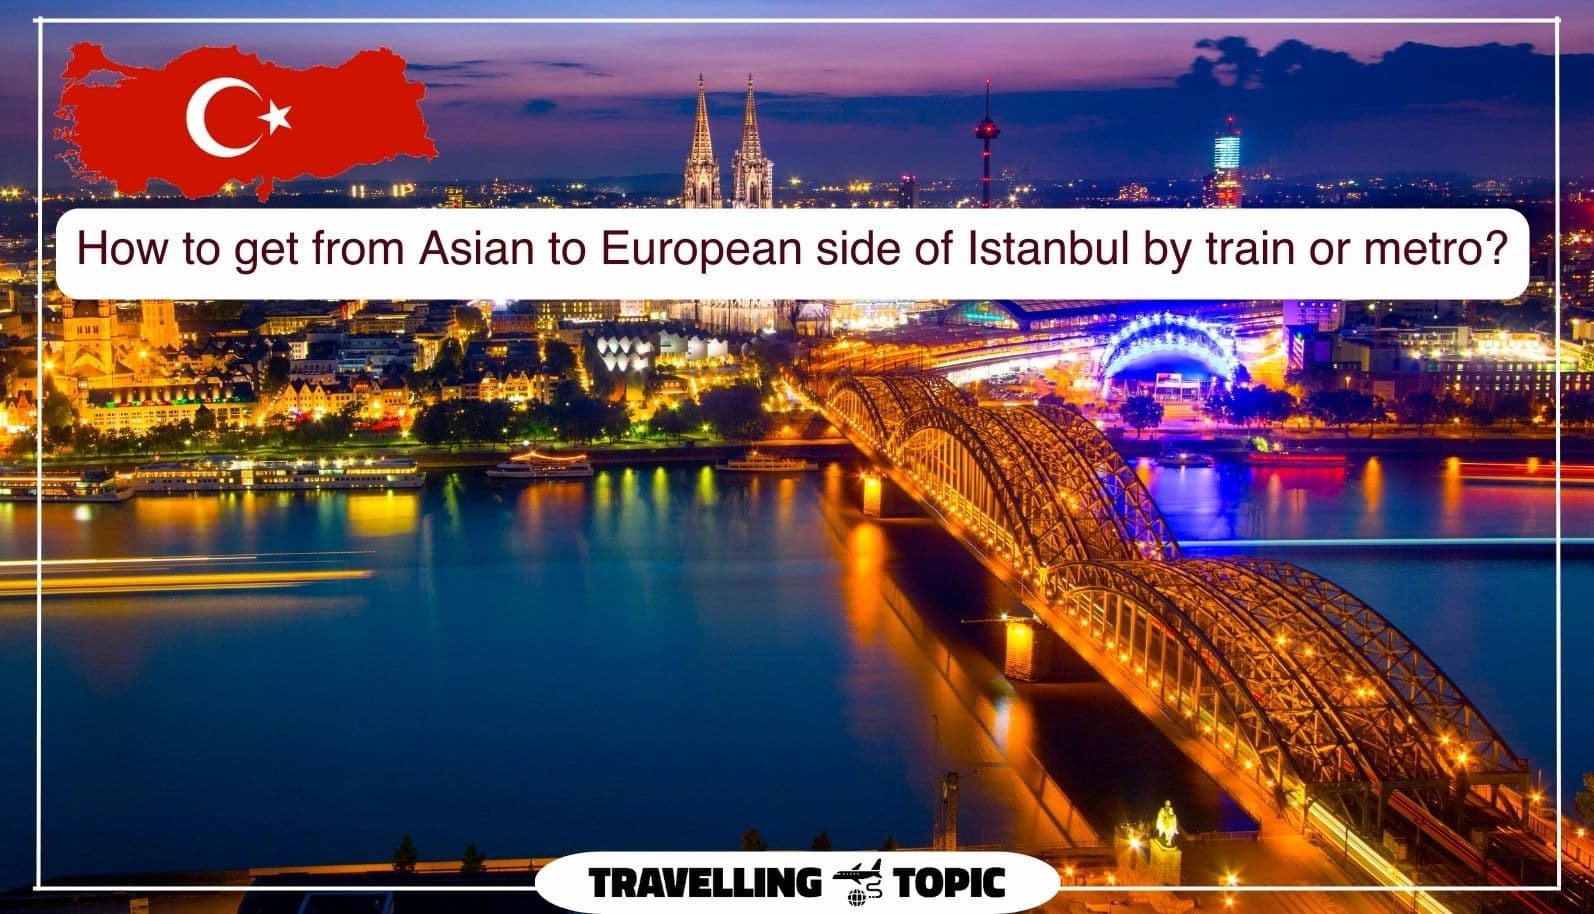 How to get from Asian to European side of Istanbul by train or metro?